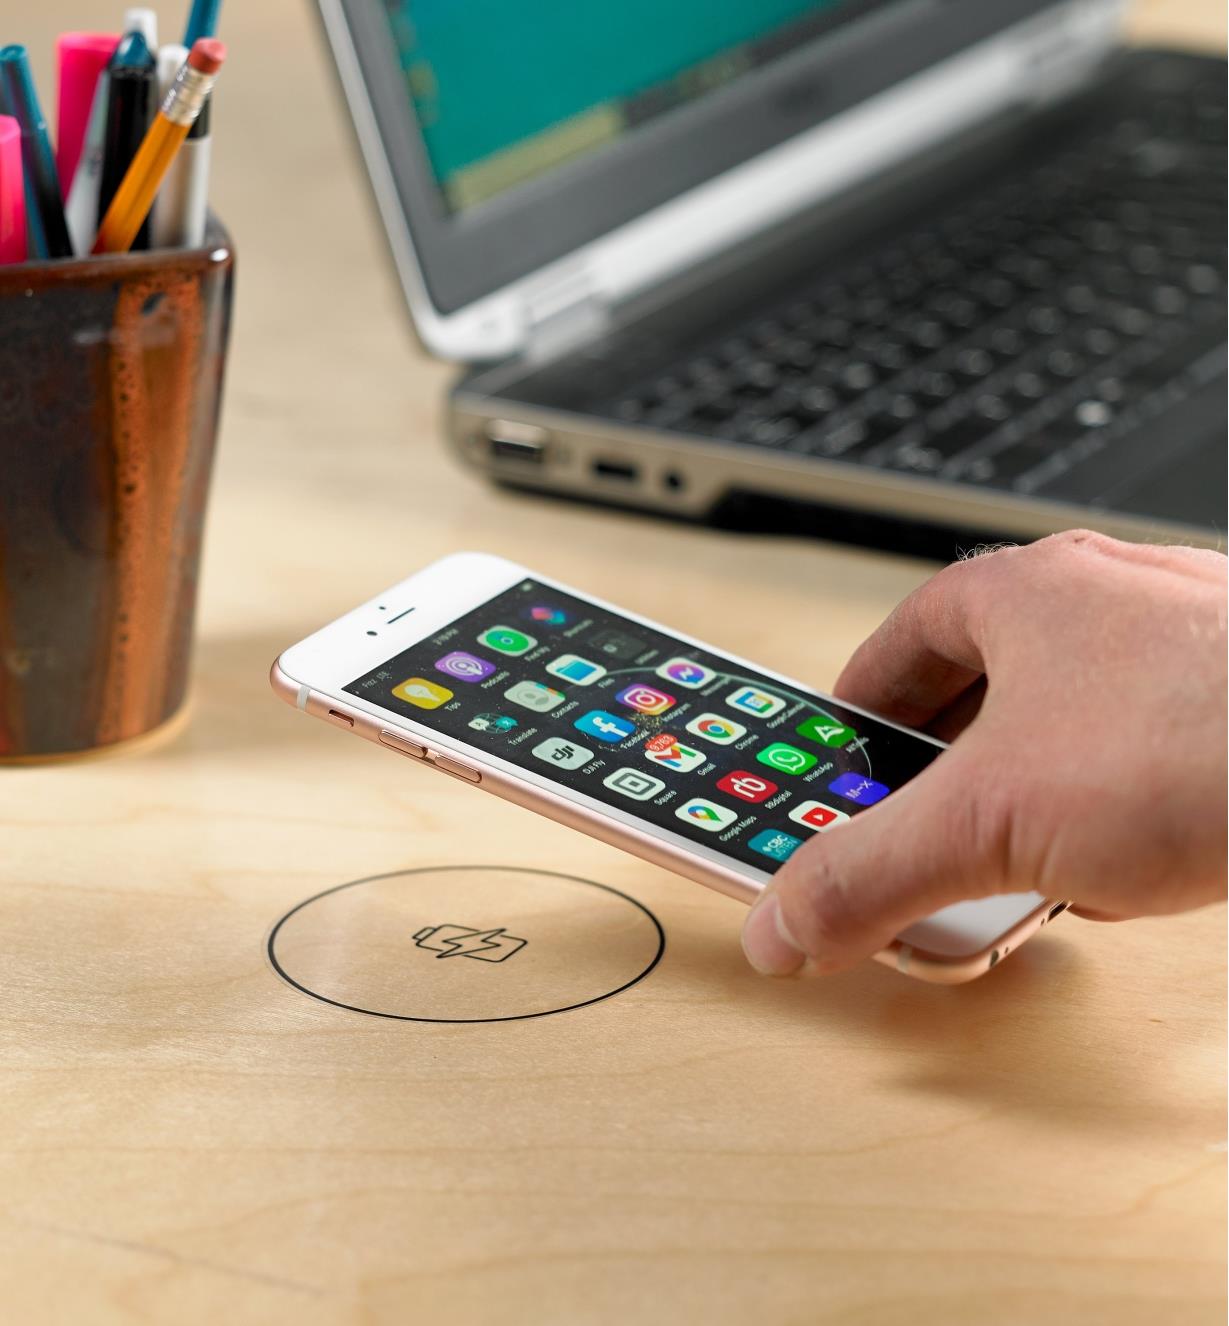 Placing a phone on a sticker marking the surface charging location of the wireless charger